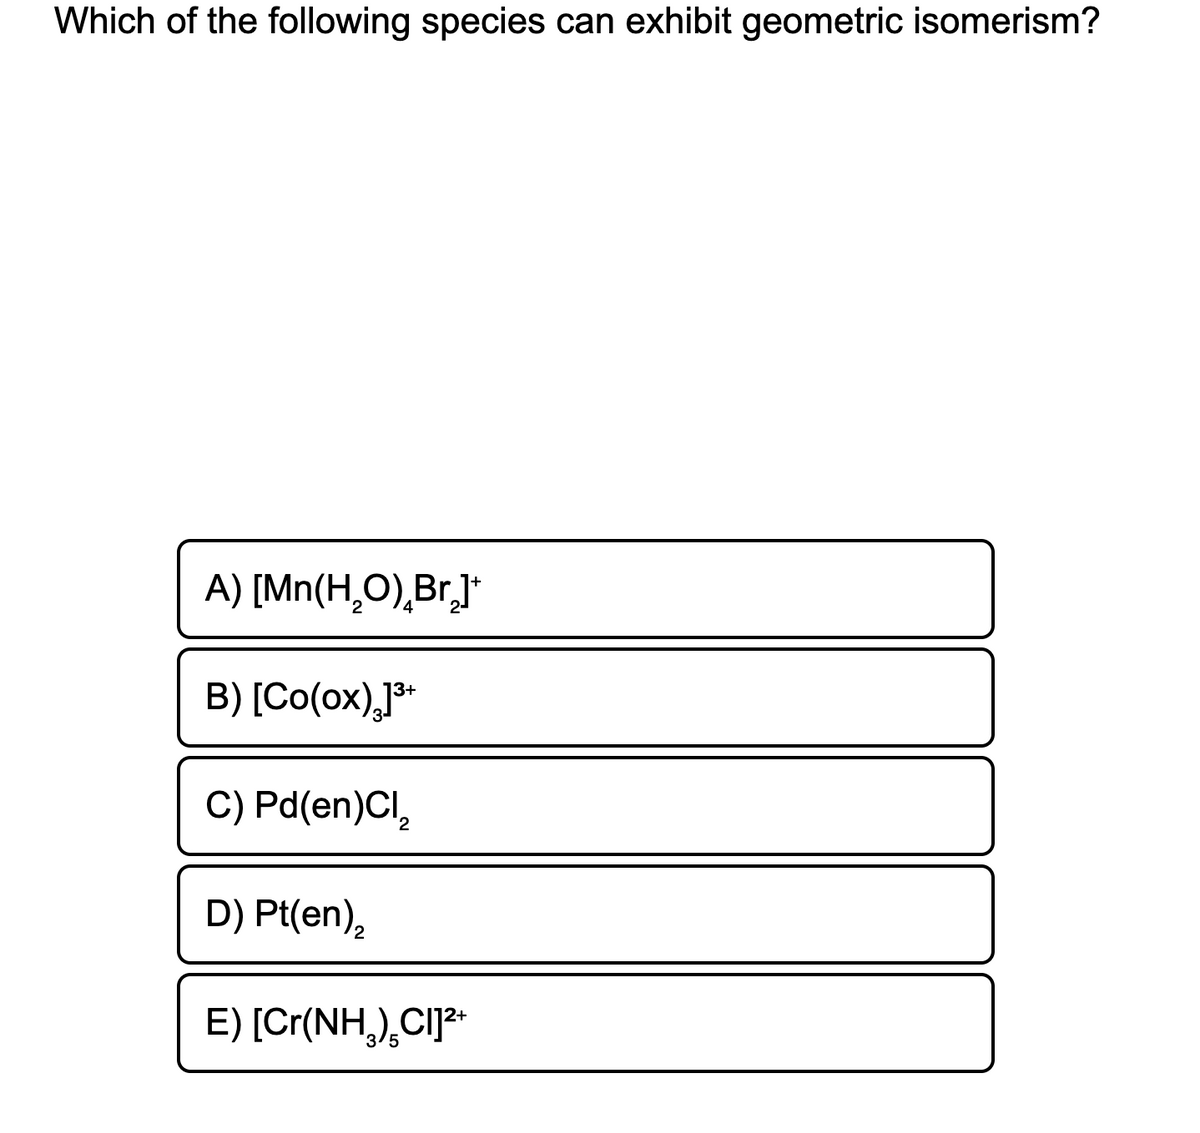 Which of the following species can exhibit geometric isomerism?
A) [Mn(H,O),Br,]*
B) [Co(ox),]*
3-
C) Pd(en)CI,
D) Pt(en),
E) [Cr(NH,),CI]*
